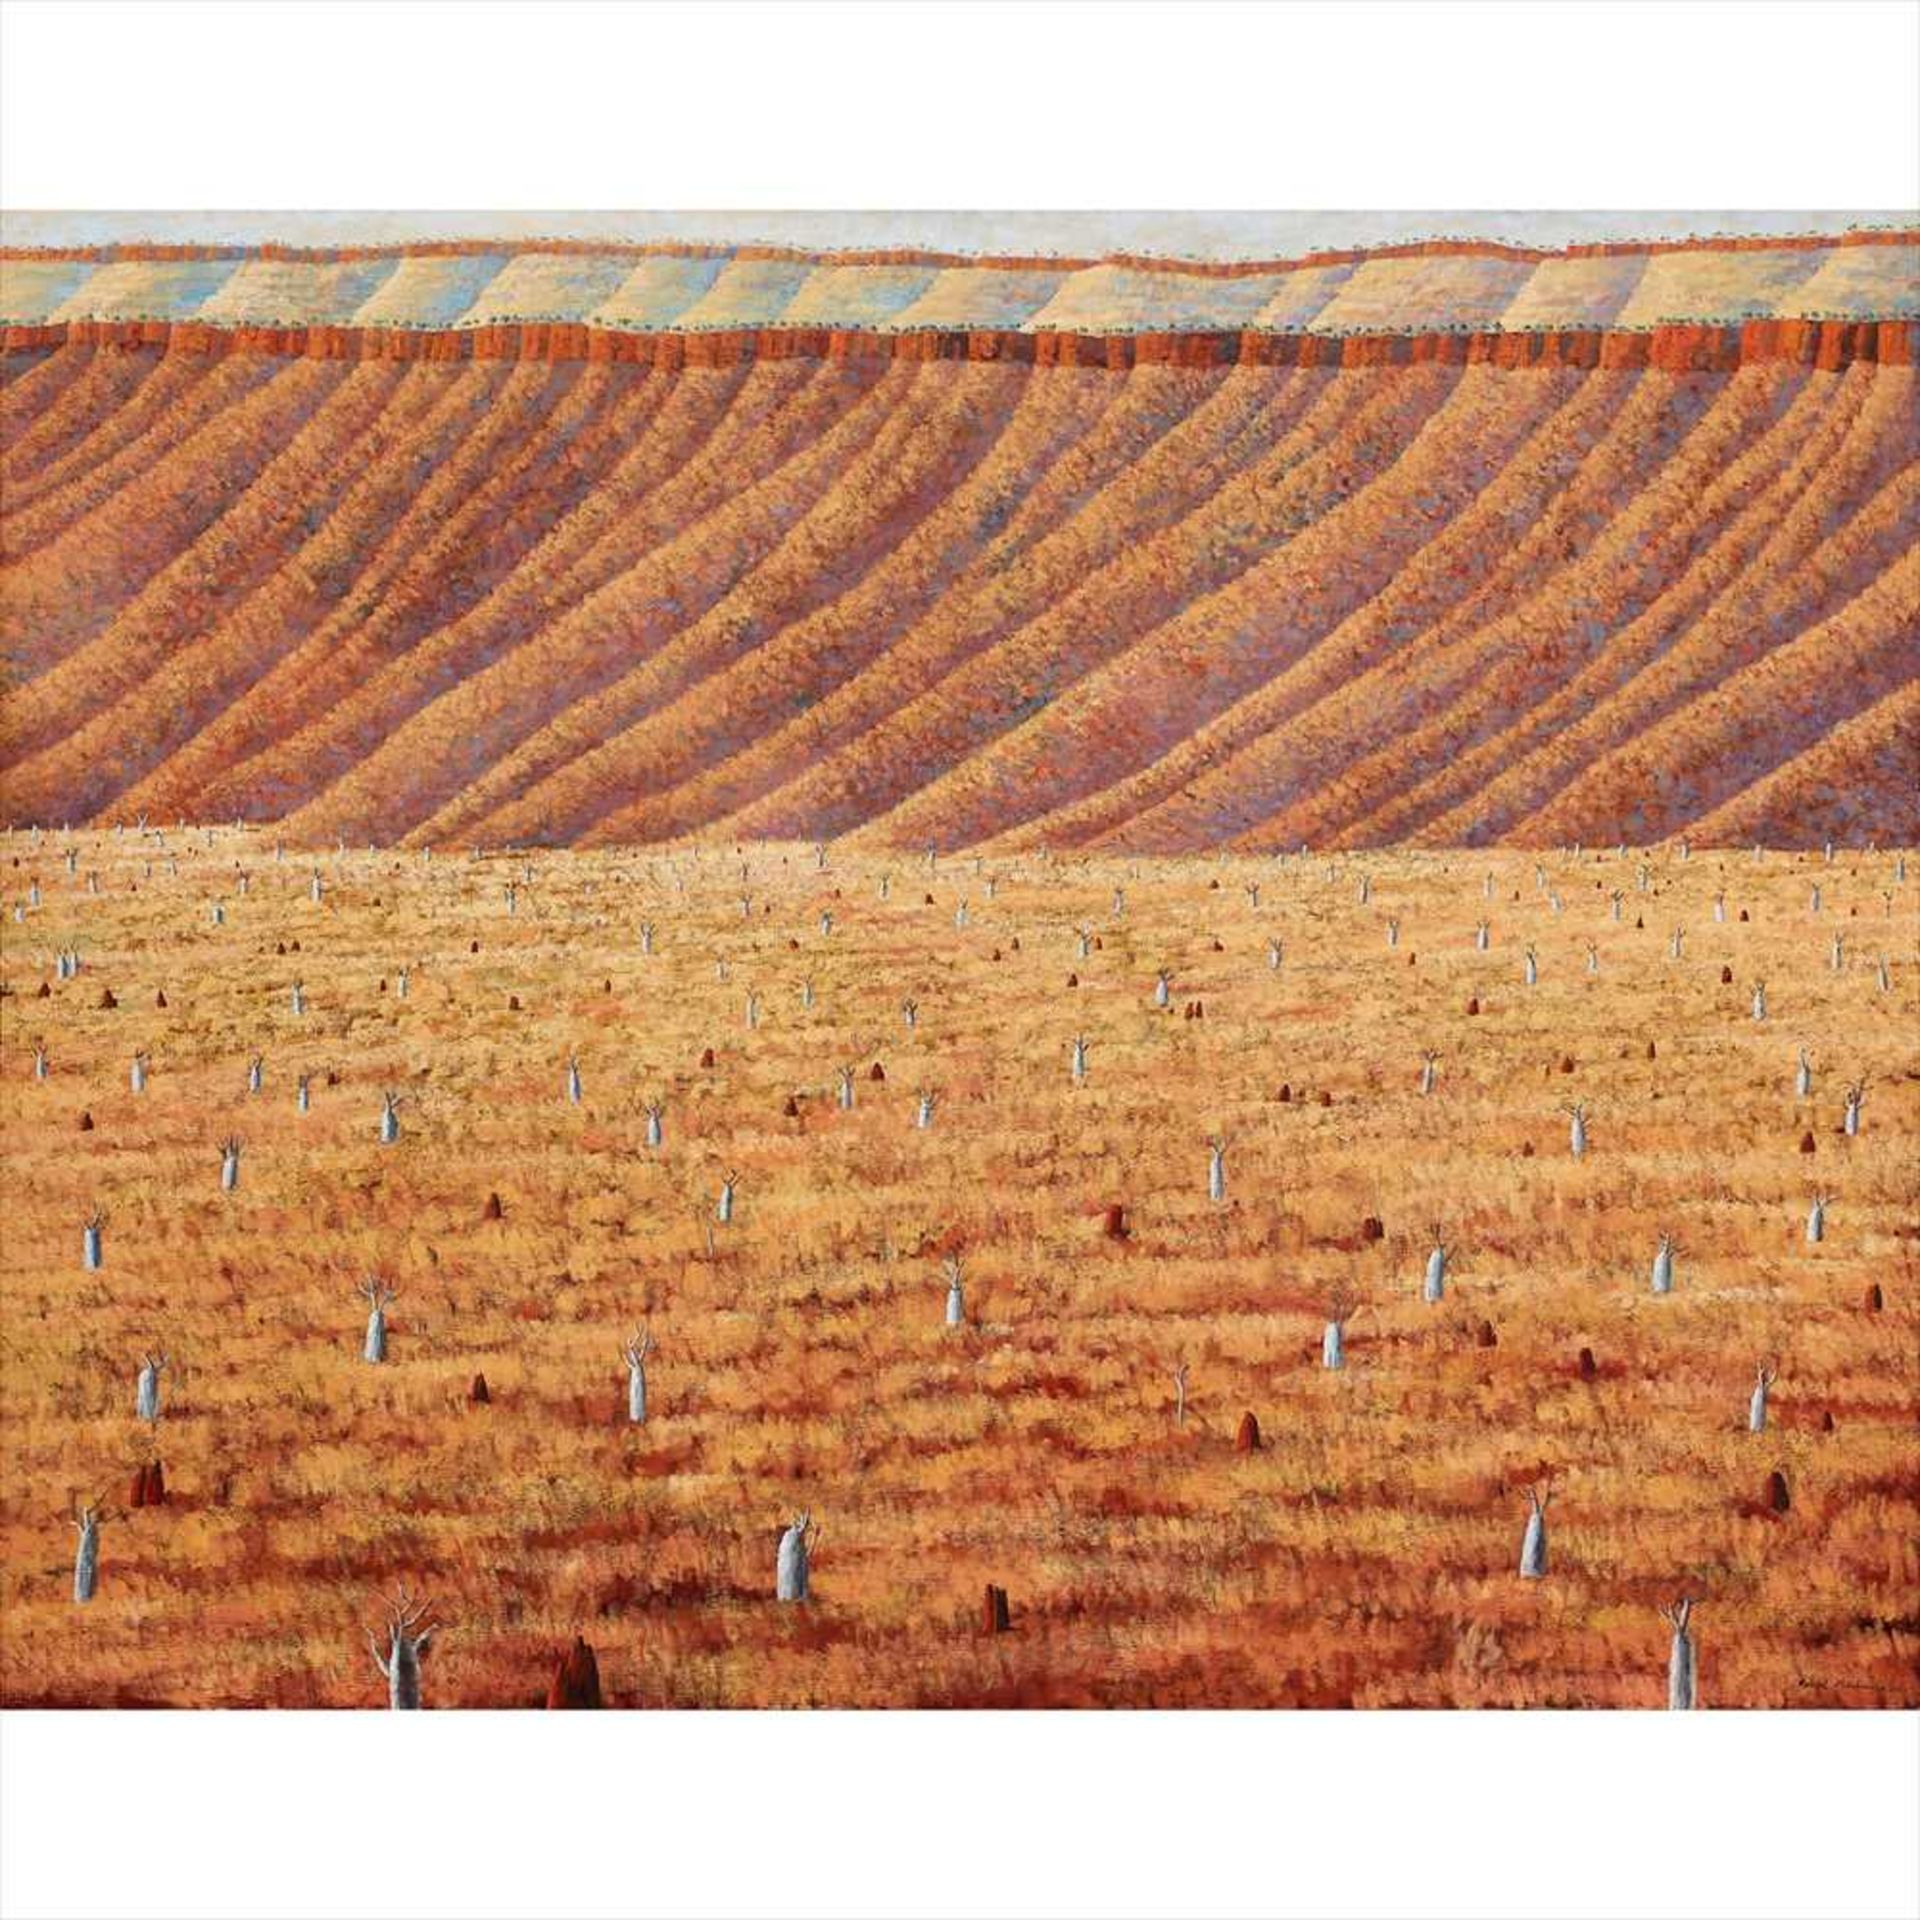 § Robert Maclaurin (Scottish B.1961) DESERT LANDSCAPE - 2000 Signed and dated, oil on canvas (